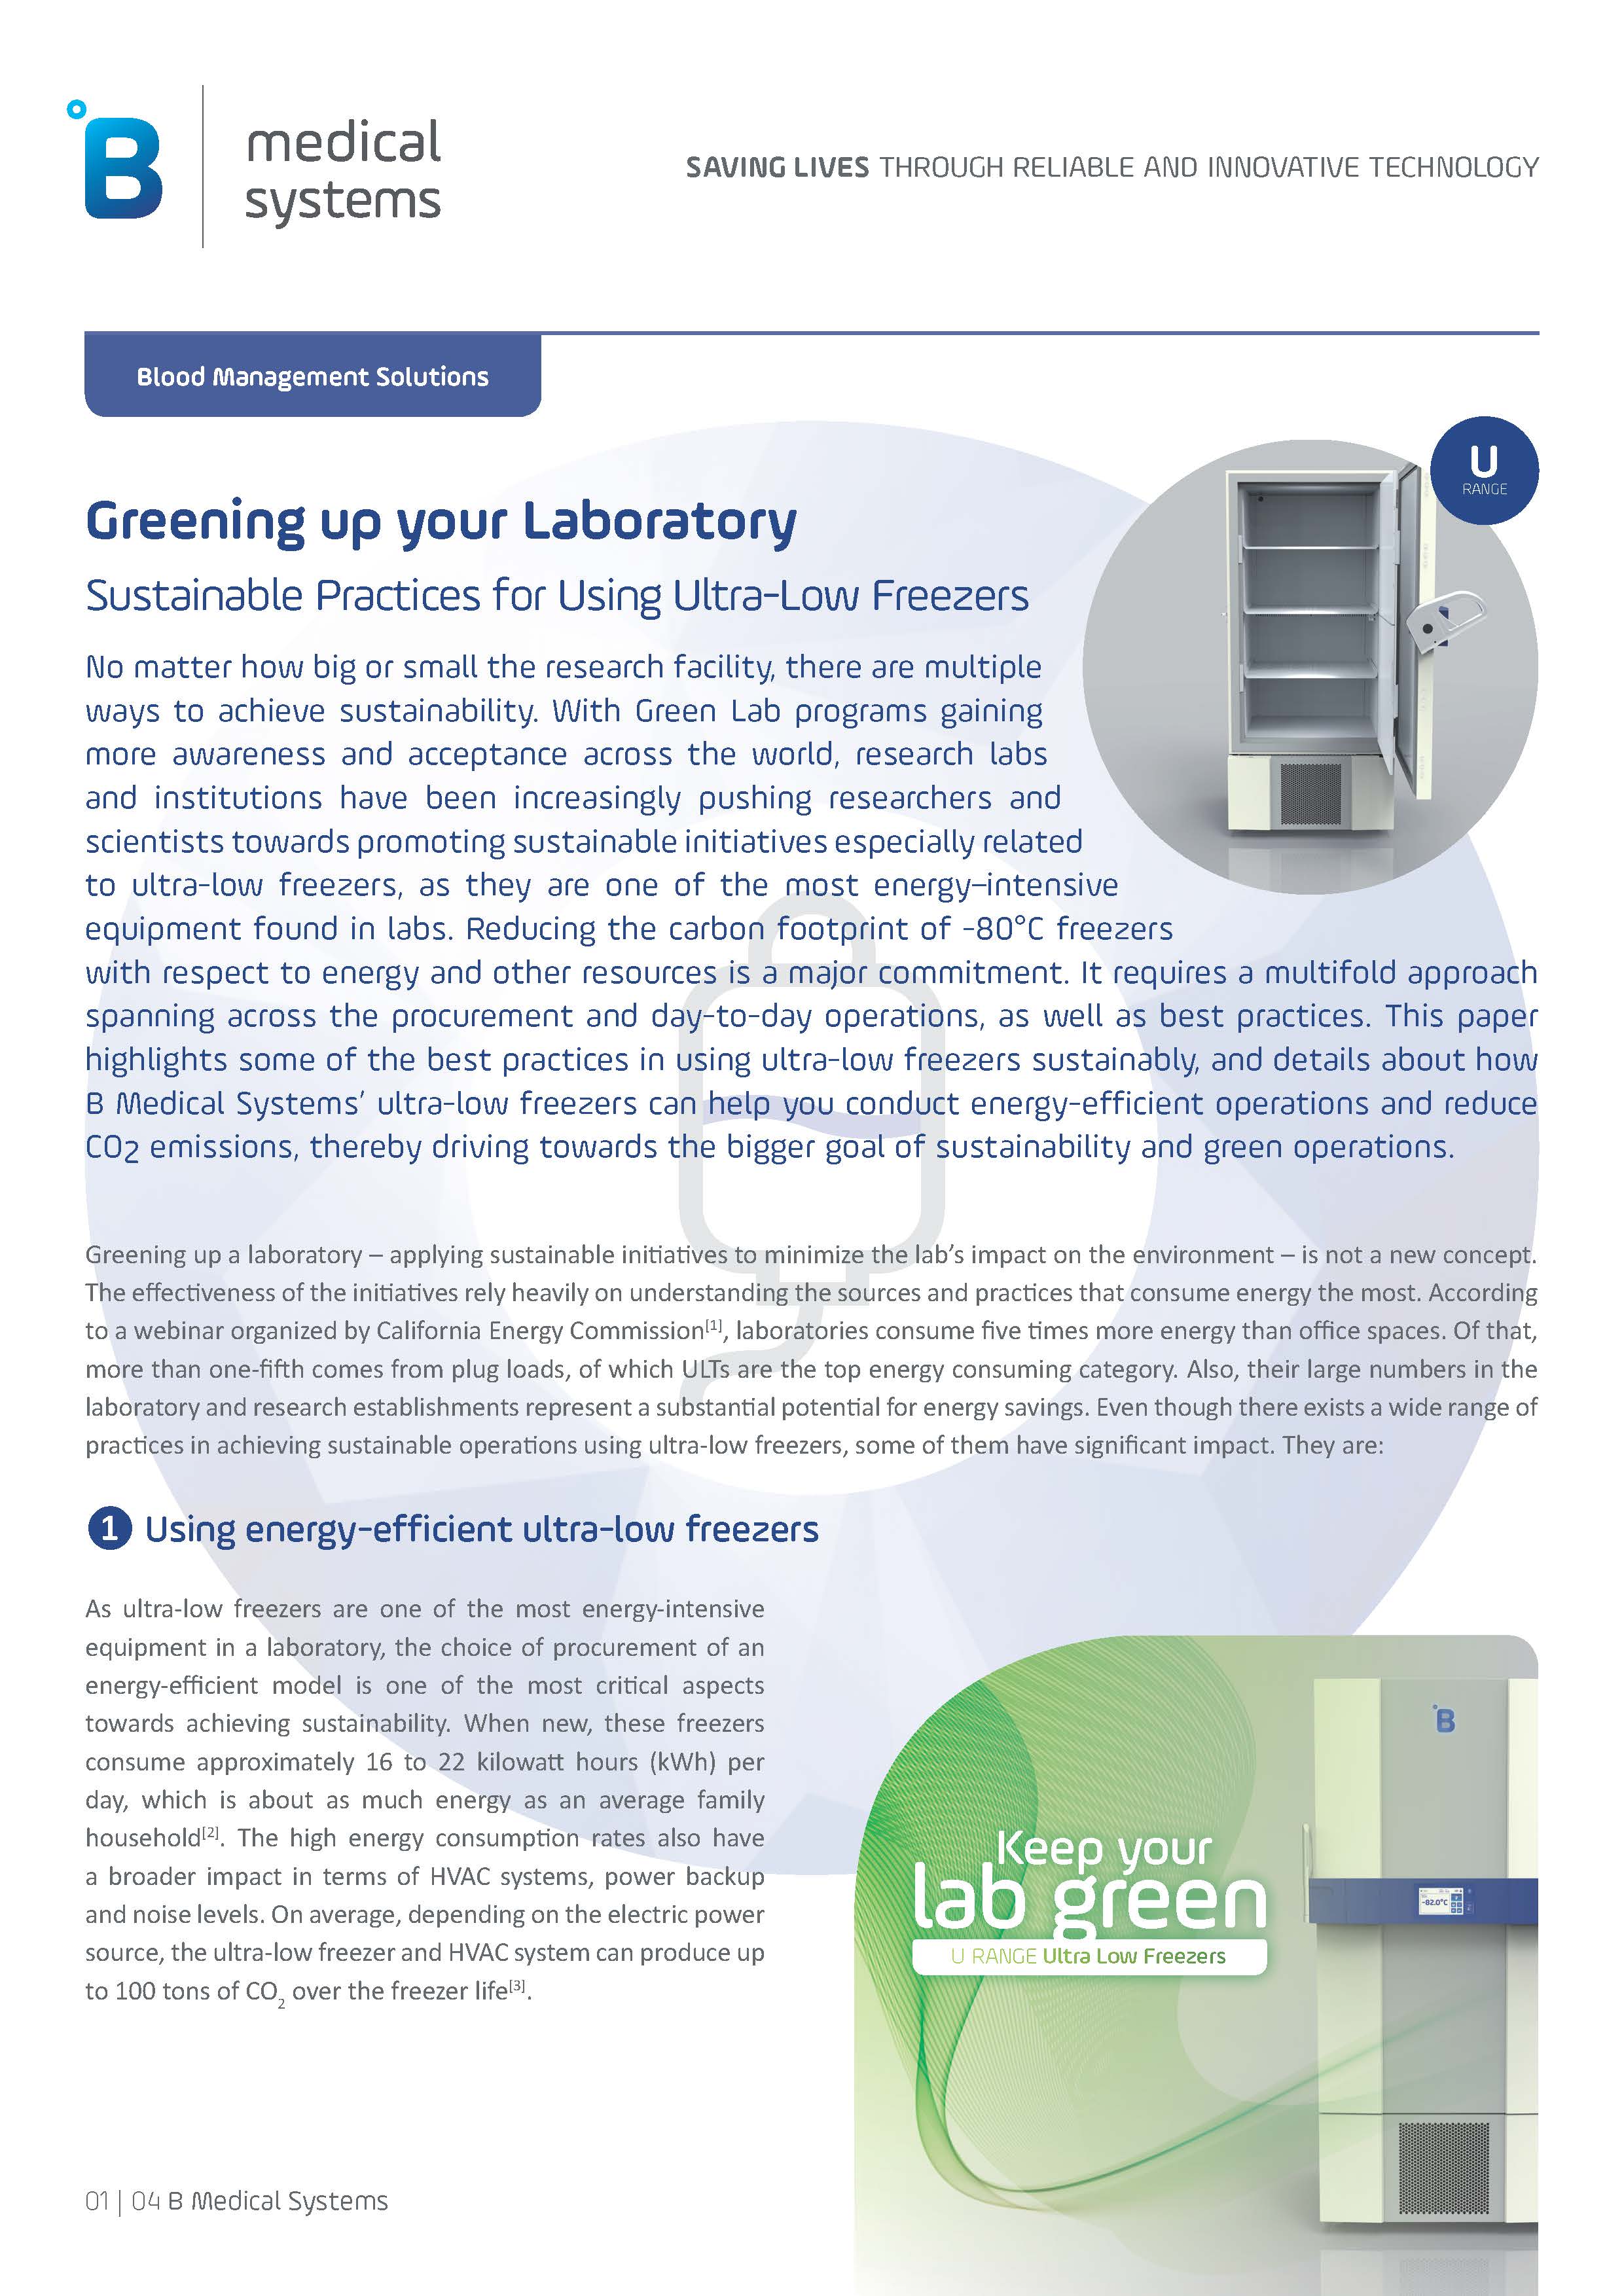 B Medical Systems - Greening up your Laboratories with Ultra Low Freezers - White Paper_Page_1.jpg